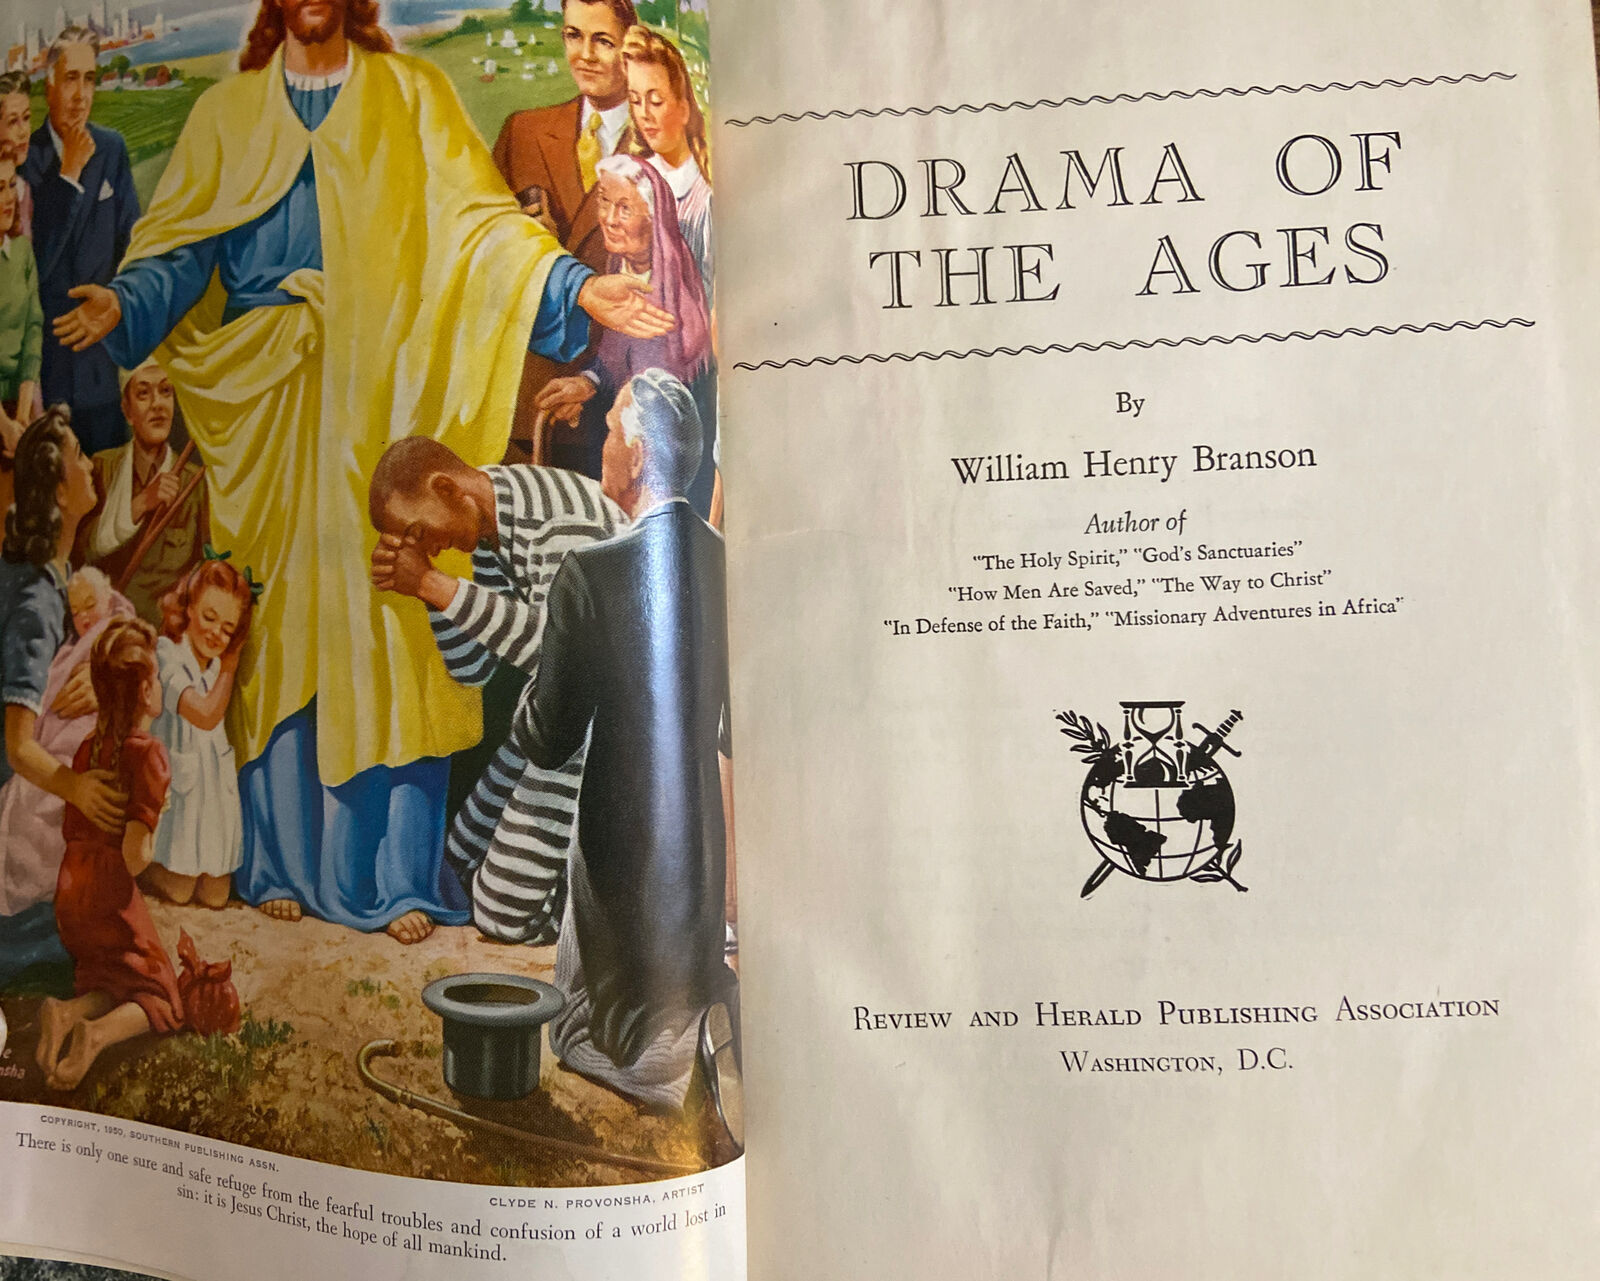 1950 “DRAMA OF THE AGES” Color illustrations, Wm Henry Branson 7th day Adventist